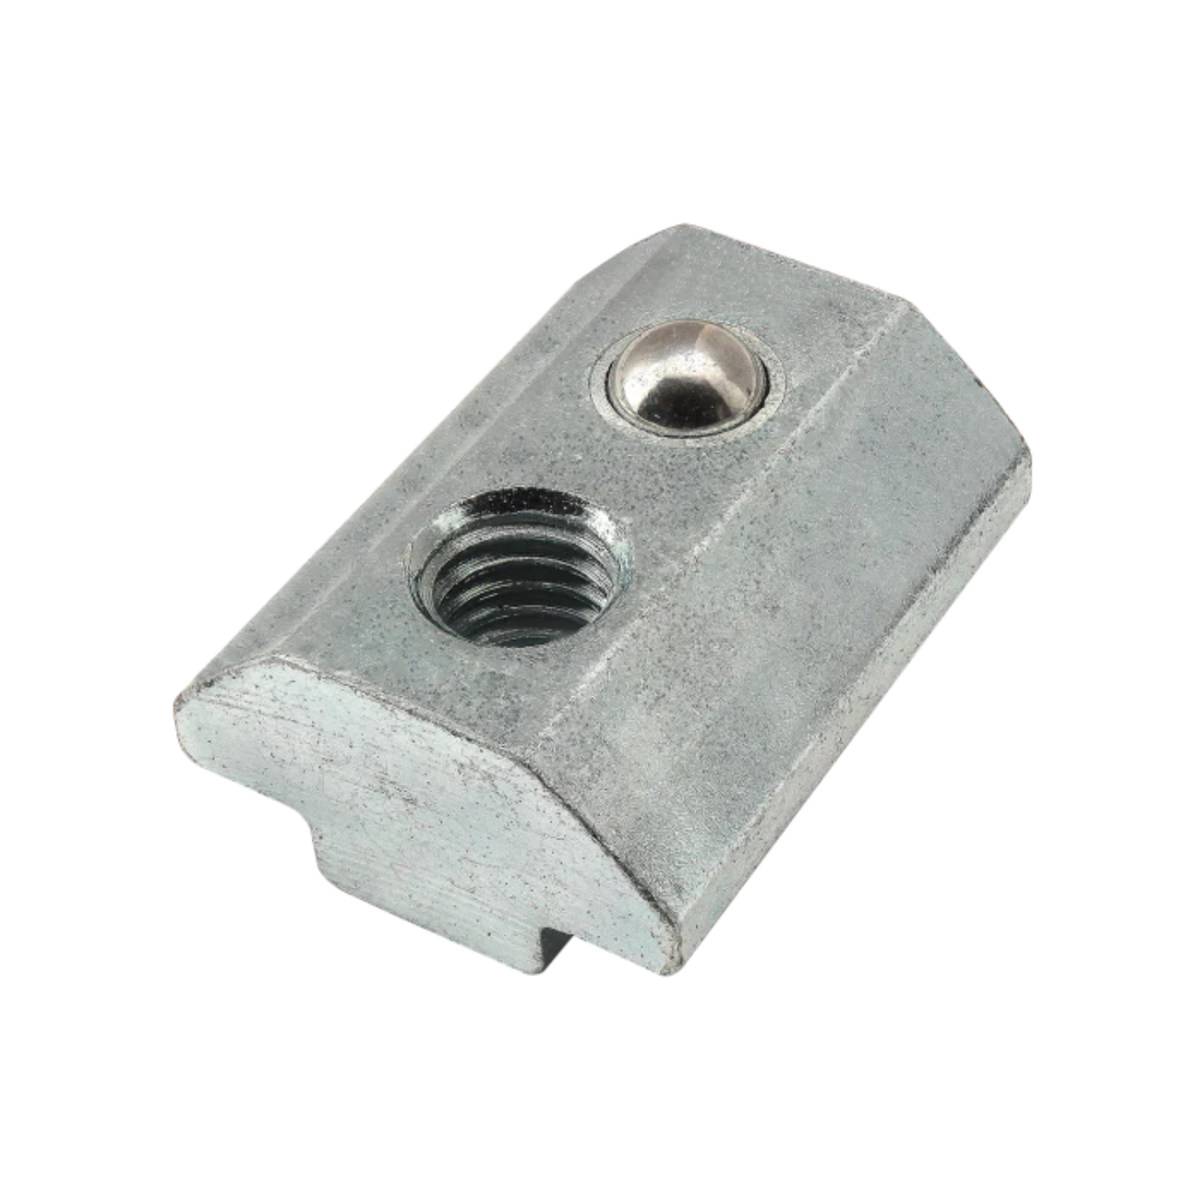 metal, rectangular t-nut with a flat bottom, a rounded top, a threaded hole on one end and a ball spring on the other end